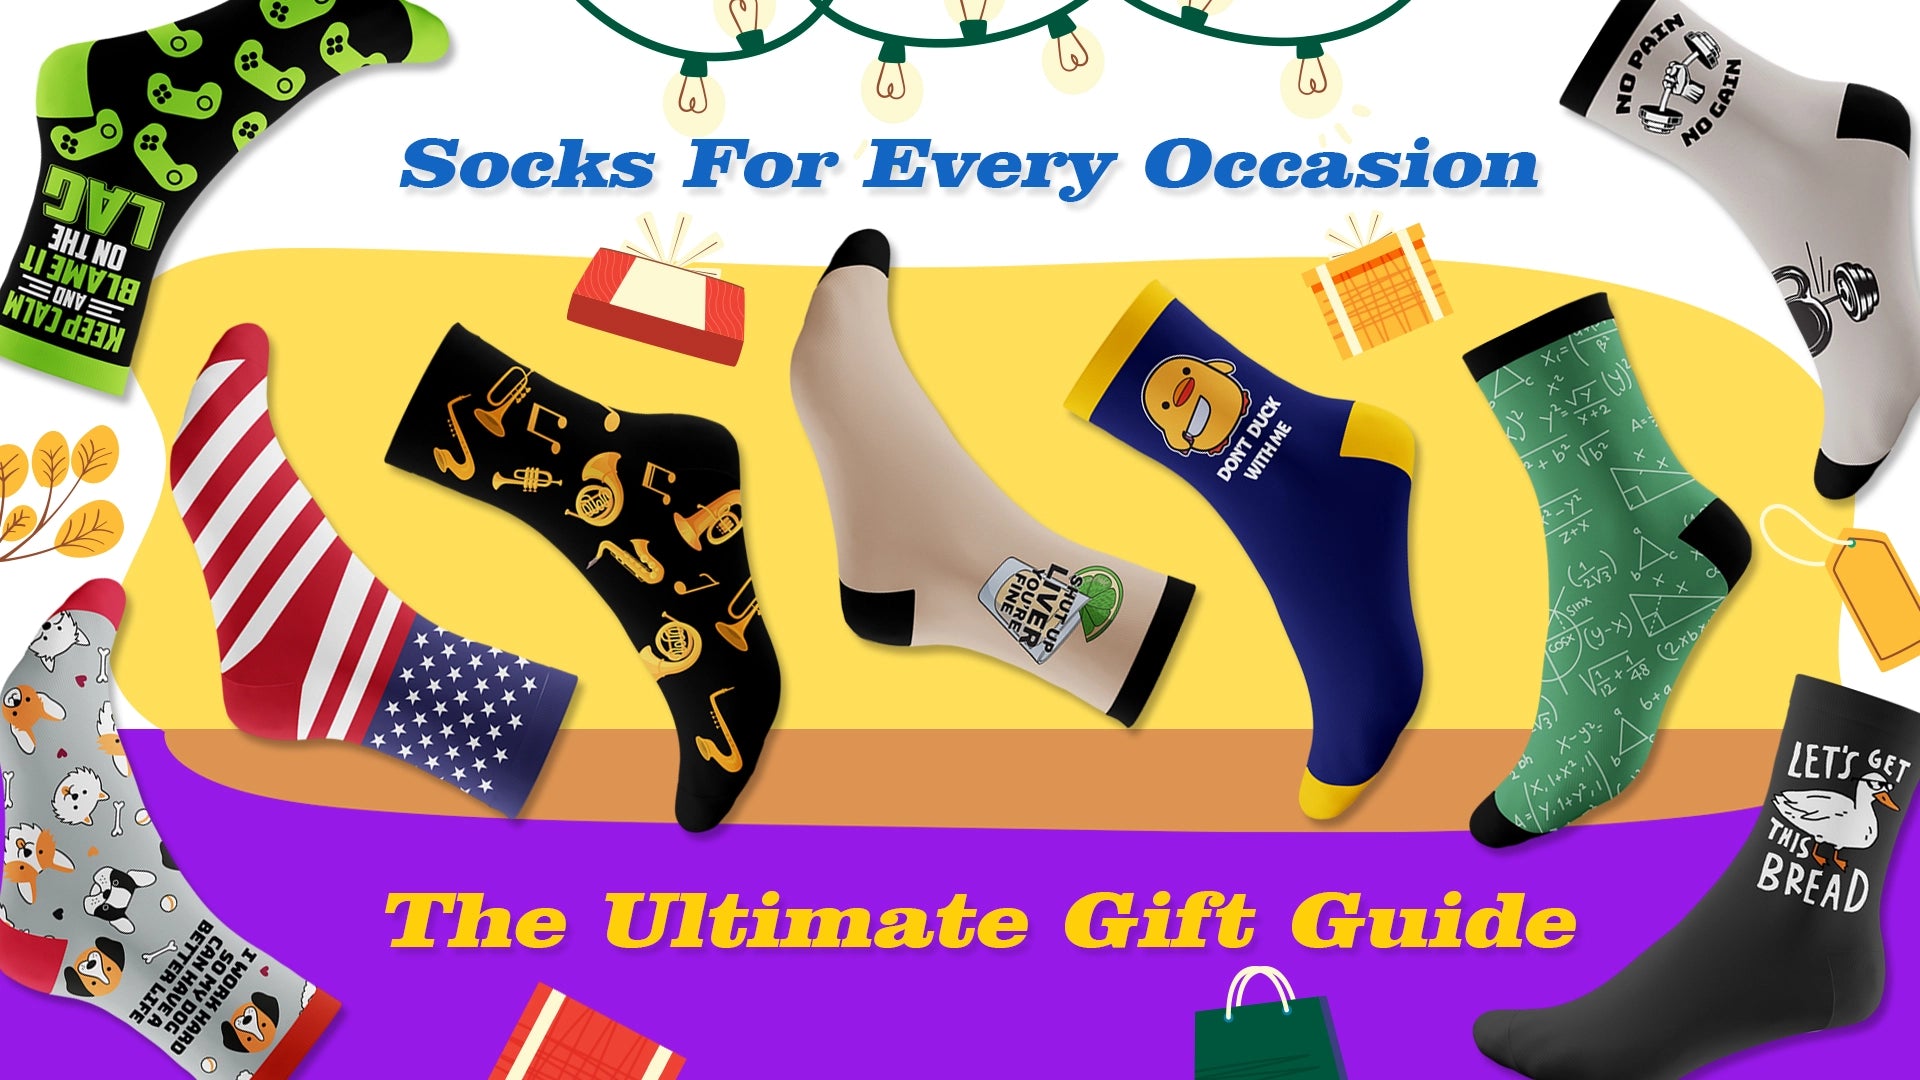 Socks For Every Occasion: The Ultimate Gift Guide